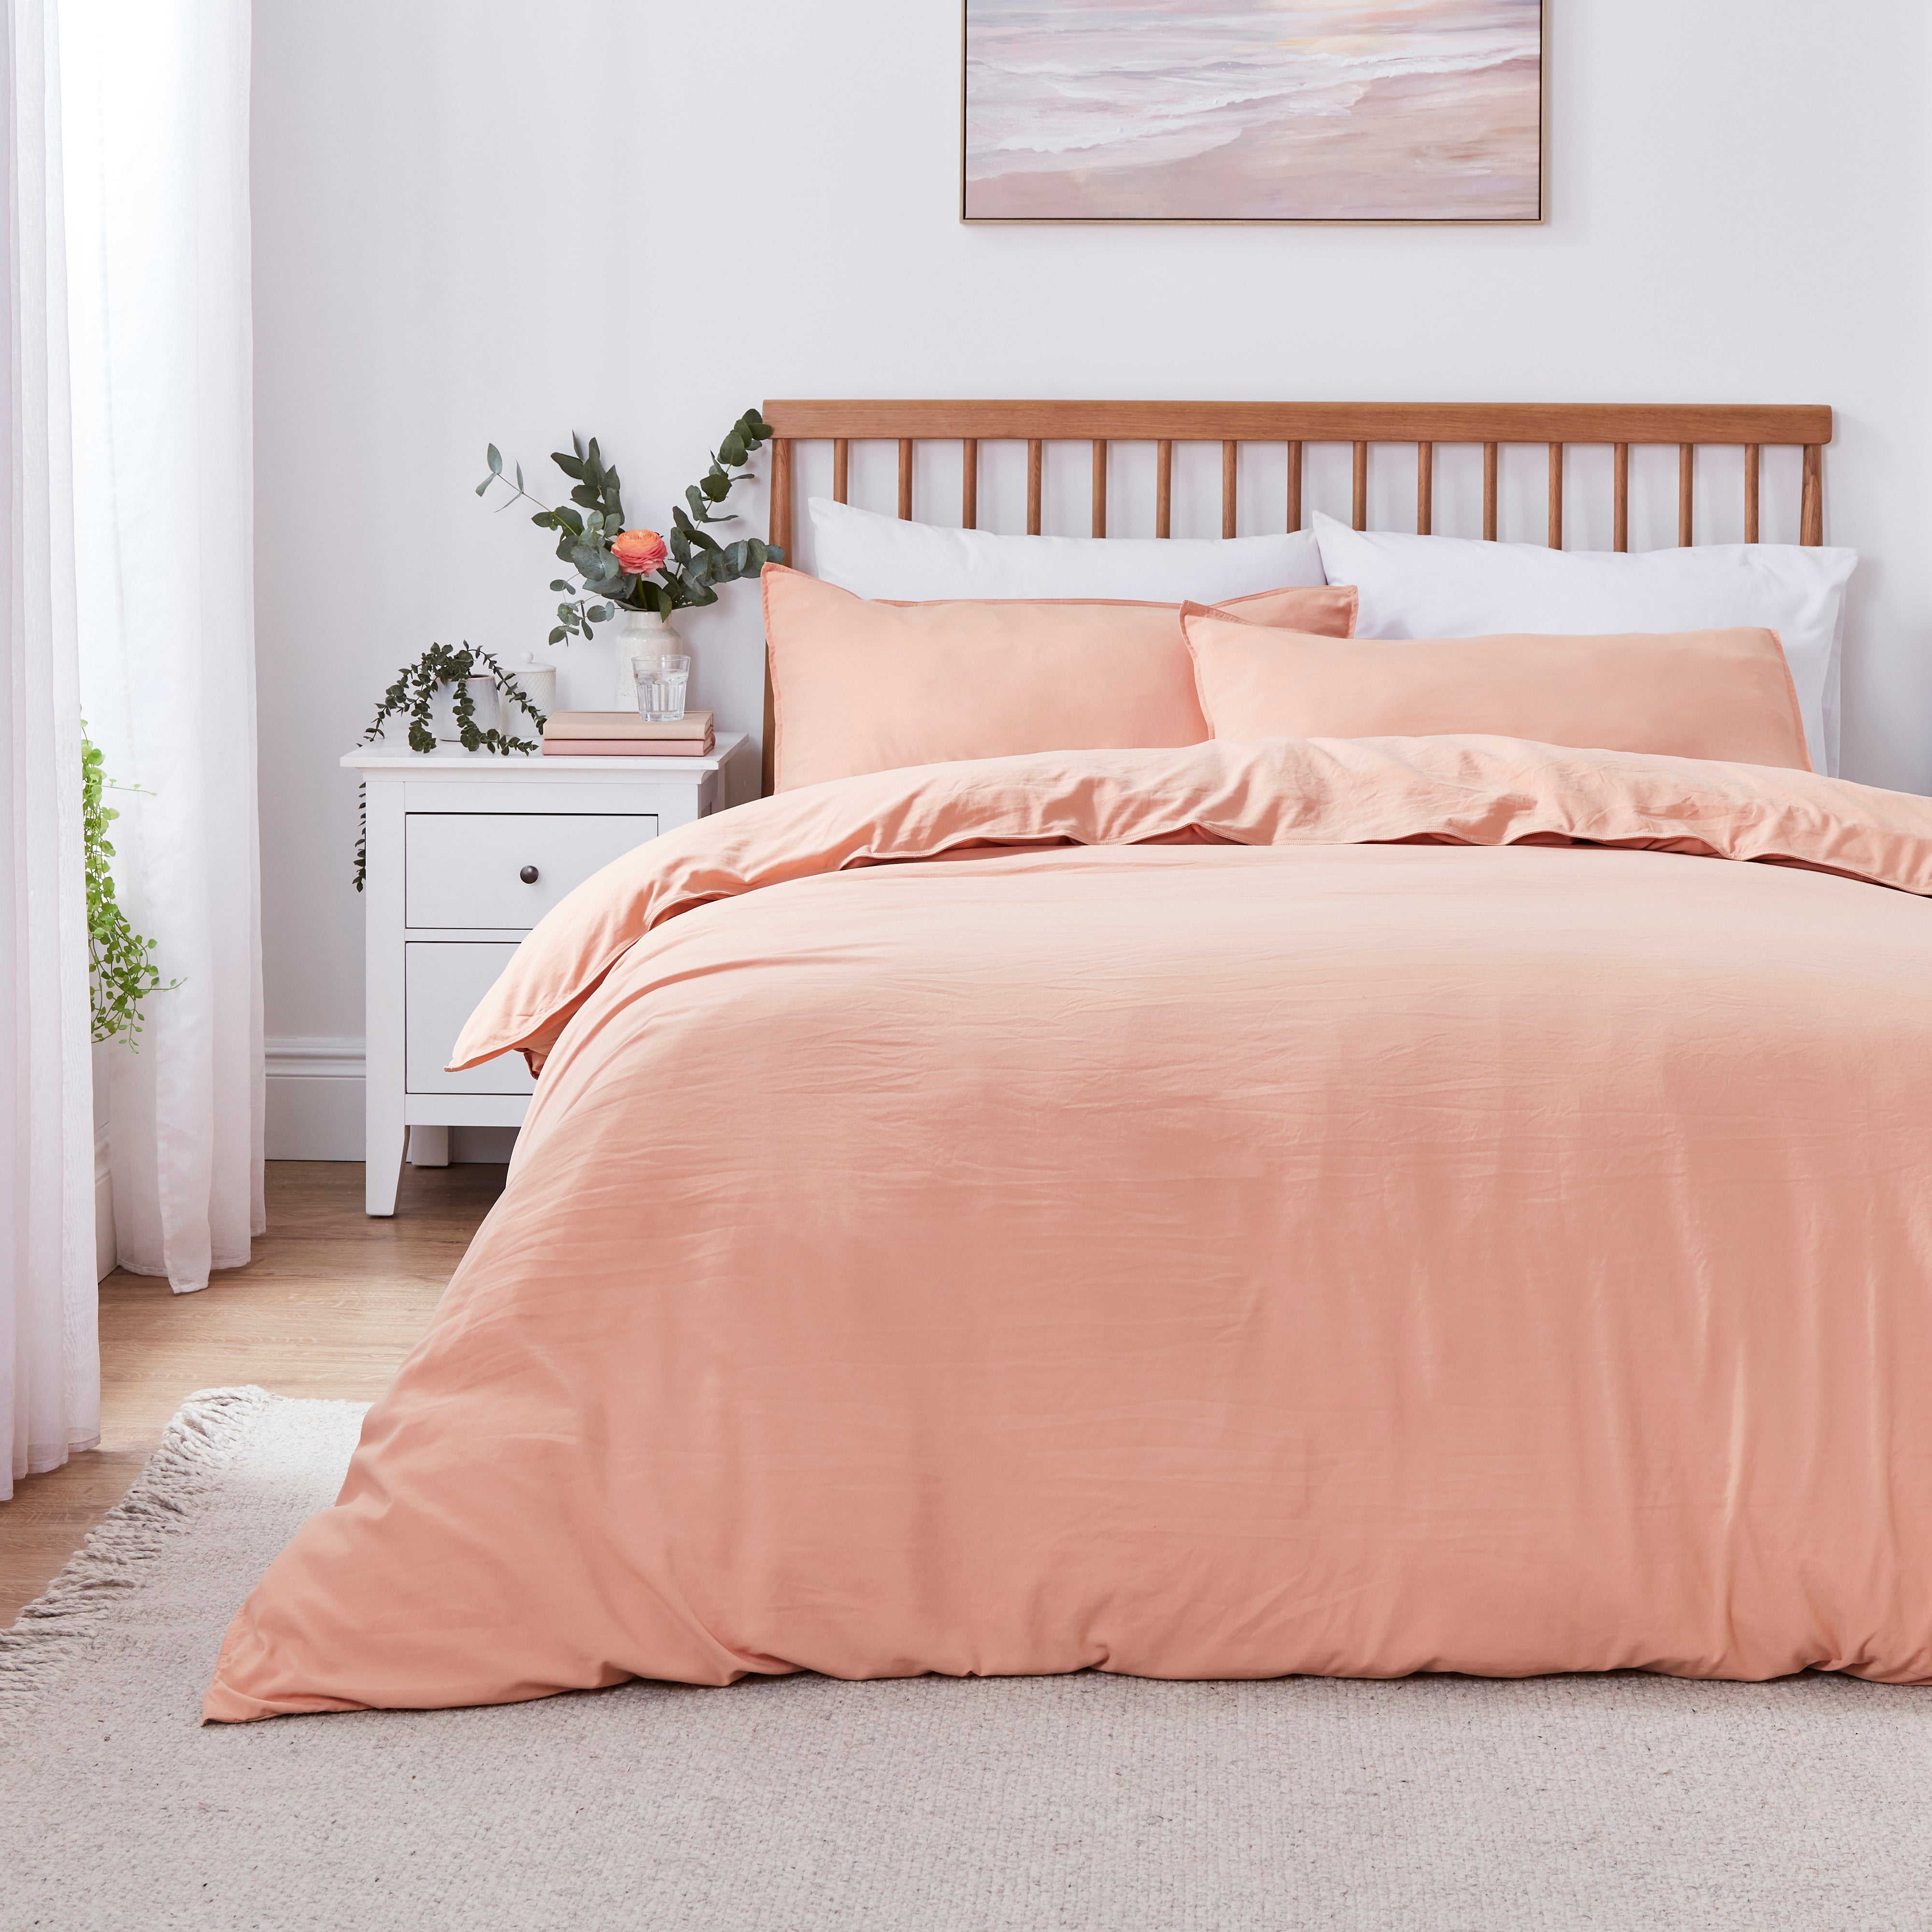 Washed Super Soft Duvet Cover And Pillowcase Set Apricot Peach